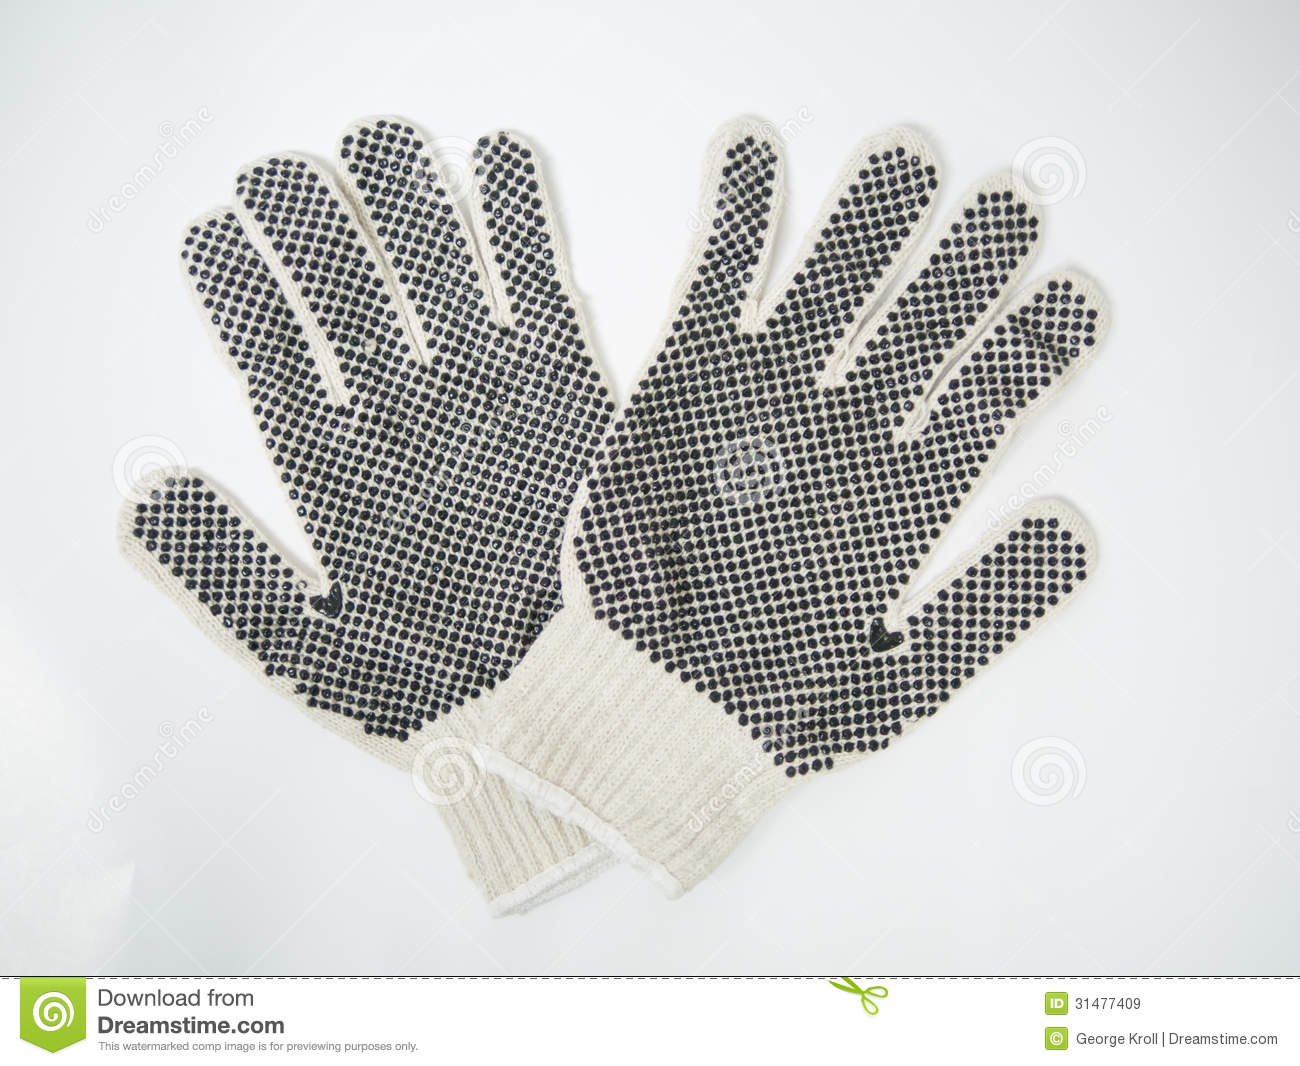 Rubber Stippled Work Gloves Royalty Free Stock Images   Image    